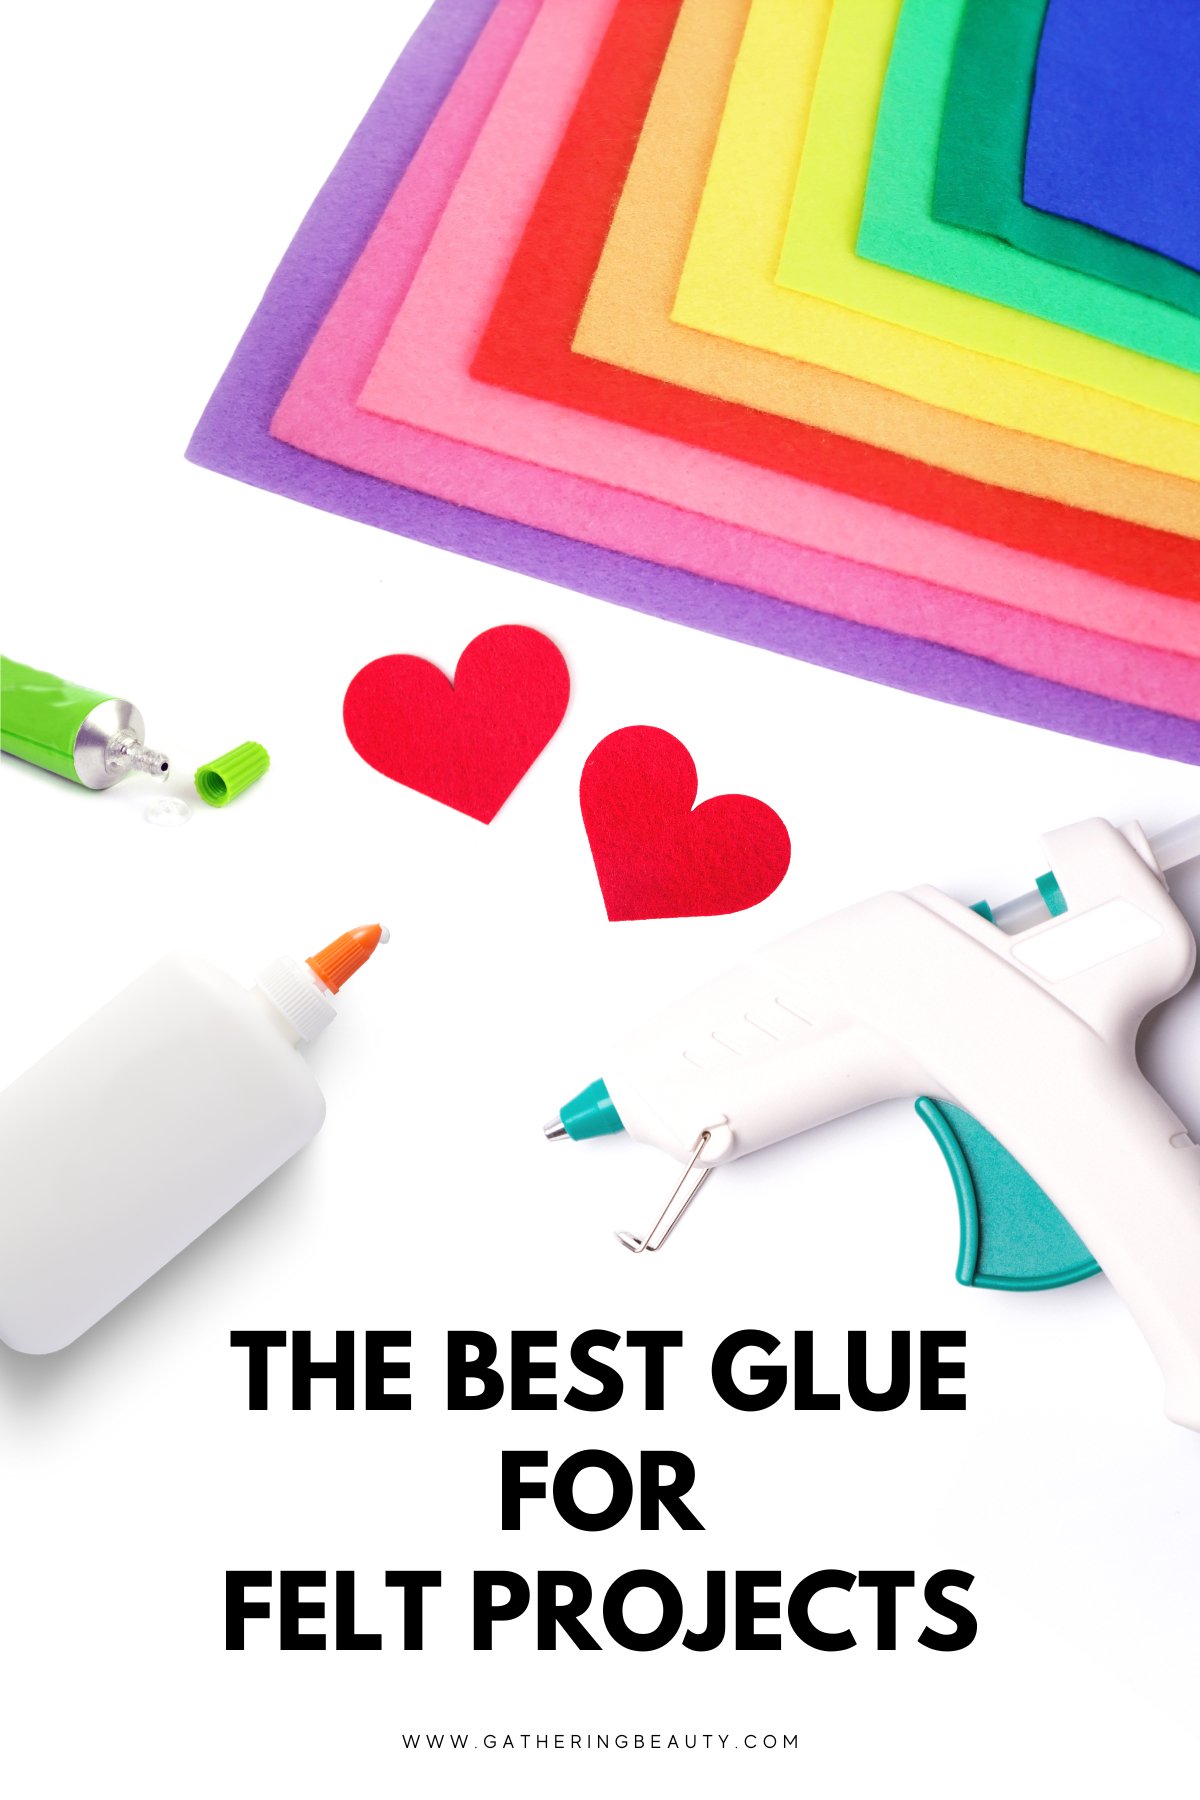 What's the Best Craft Adhesive? YOU Decide!